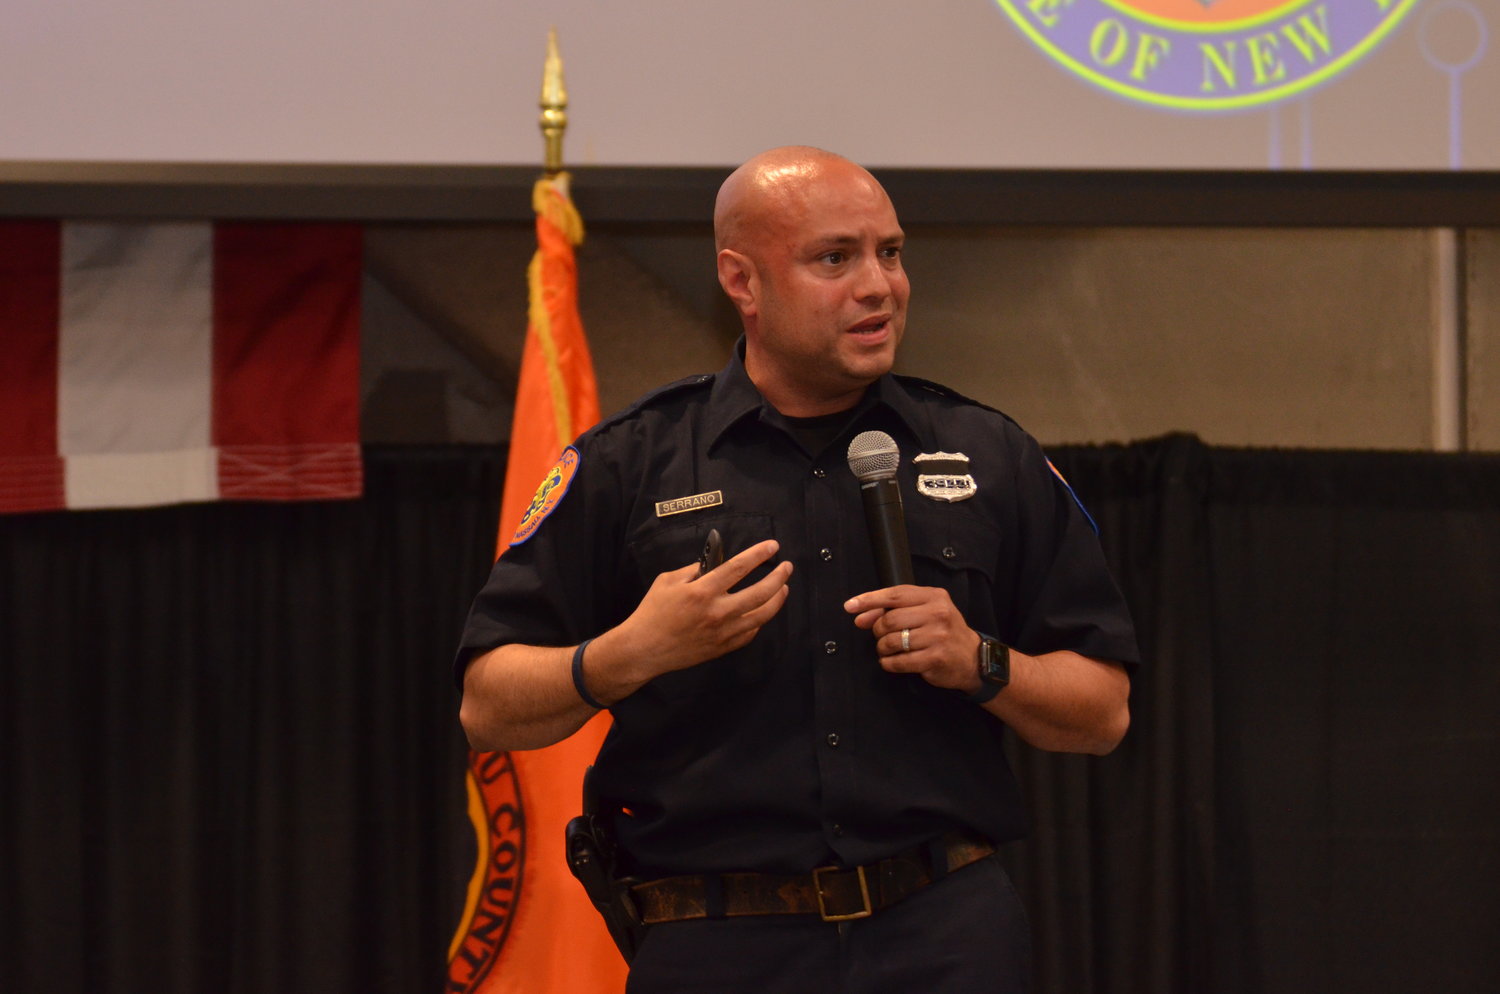 Luis serrano of the Nassau County Police Department says social media has created a number of problems with young people, believing it has created spikes in the hospitalization of teenage girls harming themselves, and attempting suicide at higher rates.